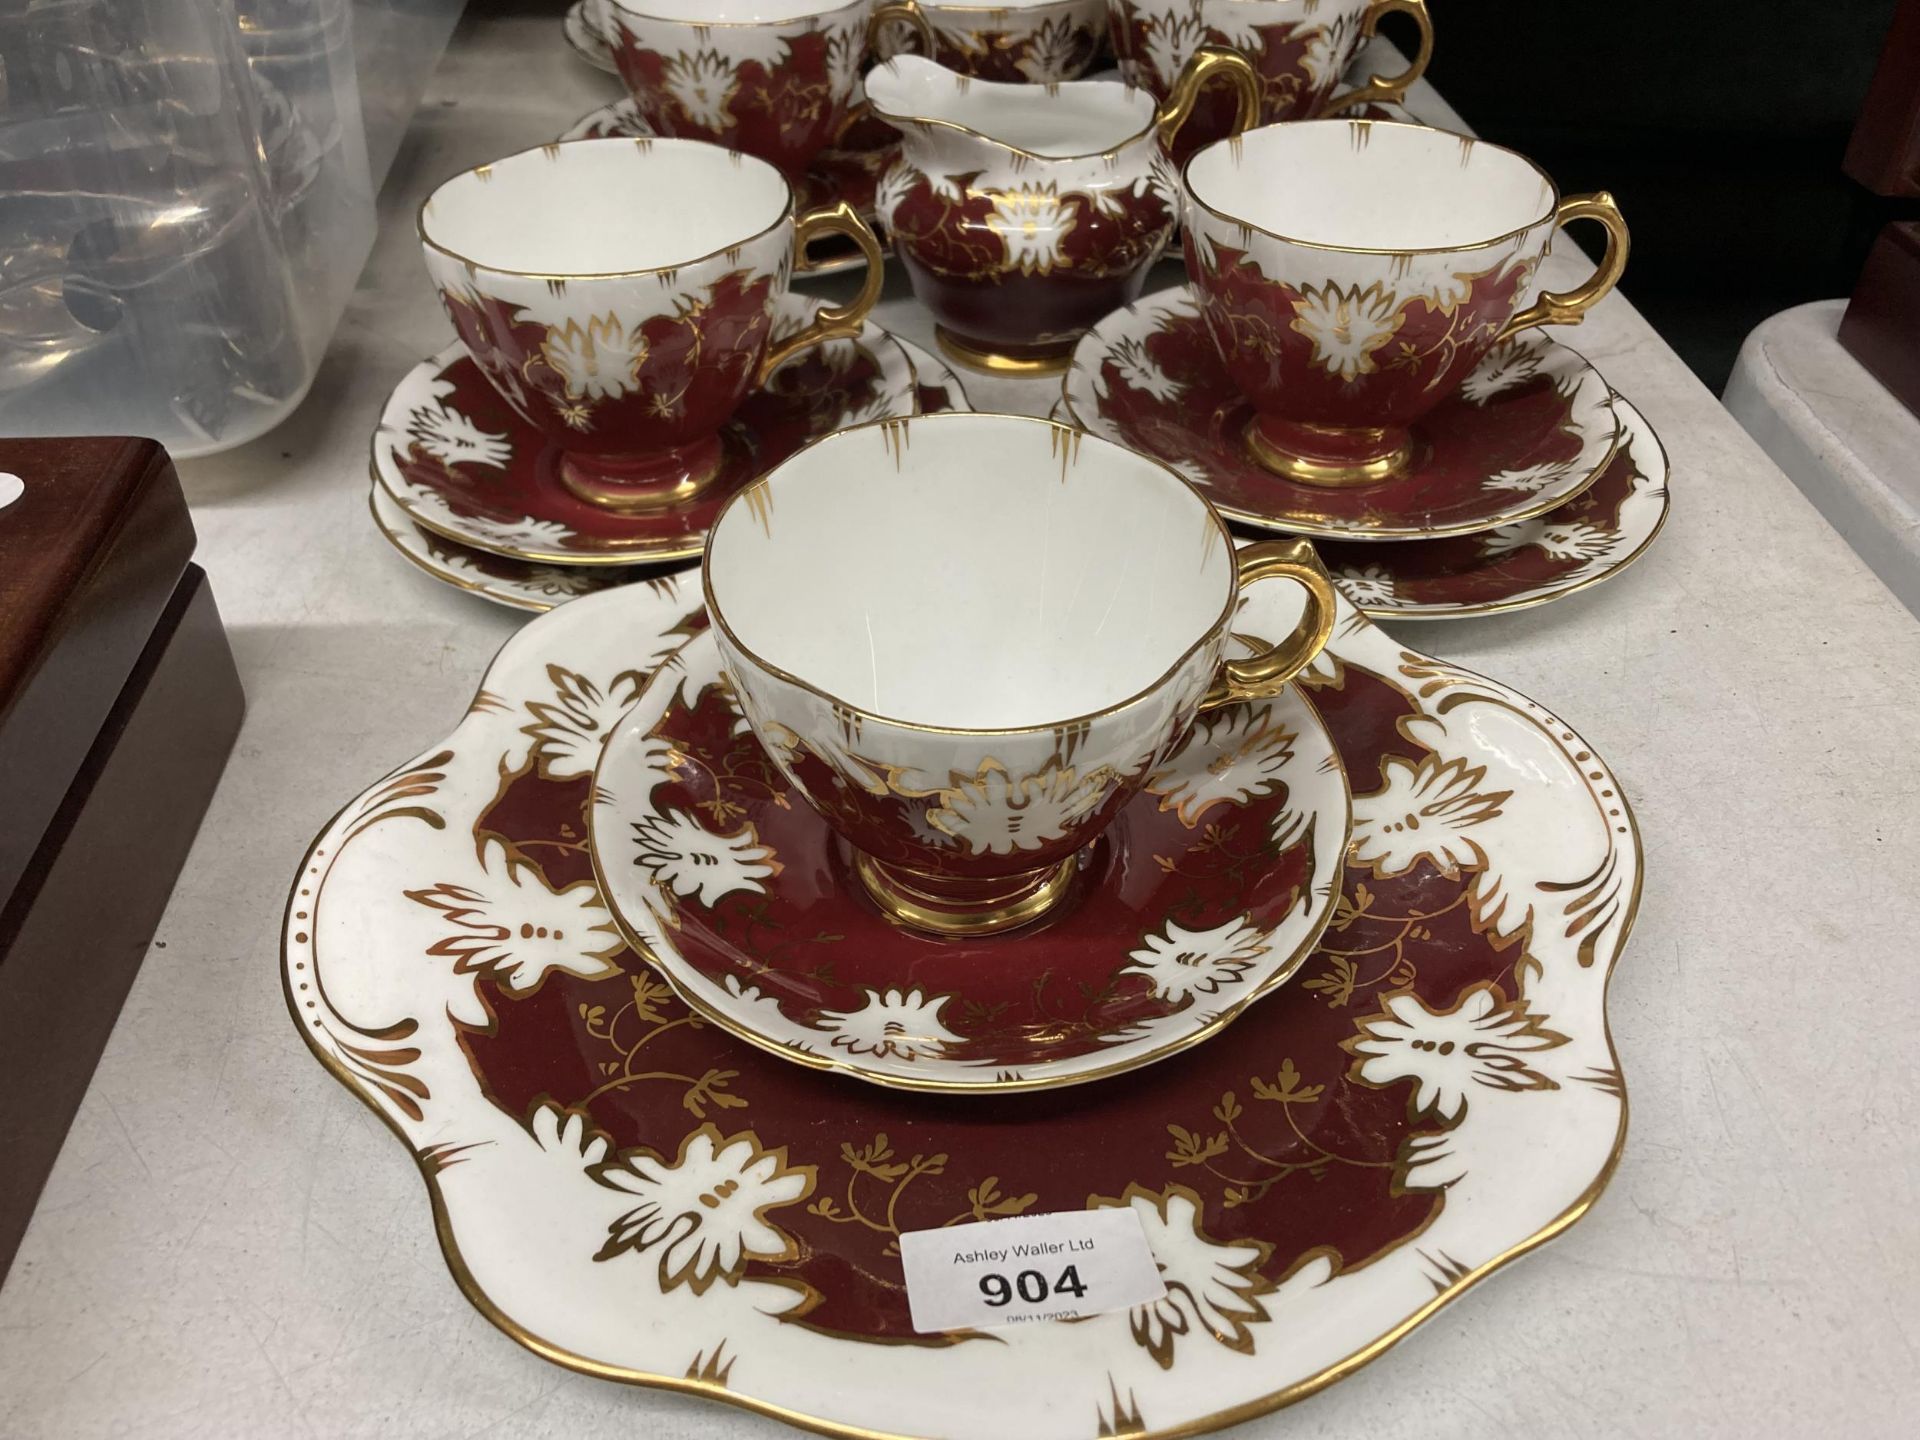 A VINTAGE ROYAL STUART CHINA PART TEASET TO INCLUDE A CAKE PLATE, CREAM JUG, SUGAR BOWL, CUPS, - Image 2 of 5